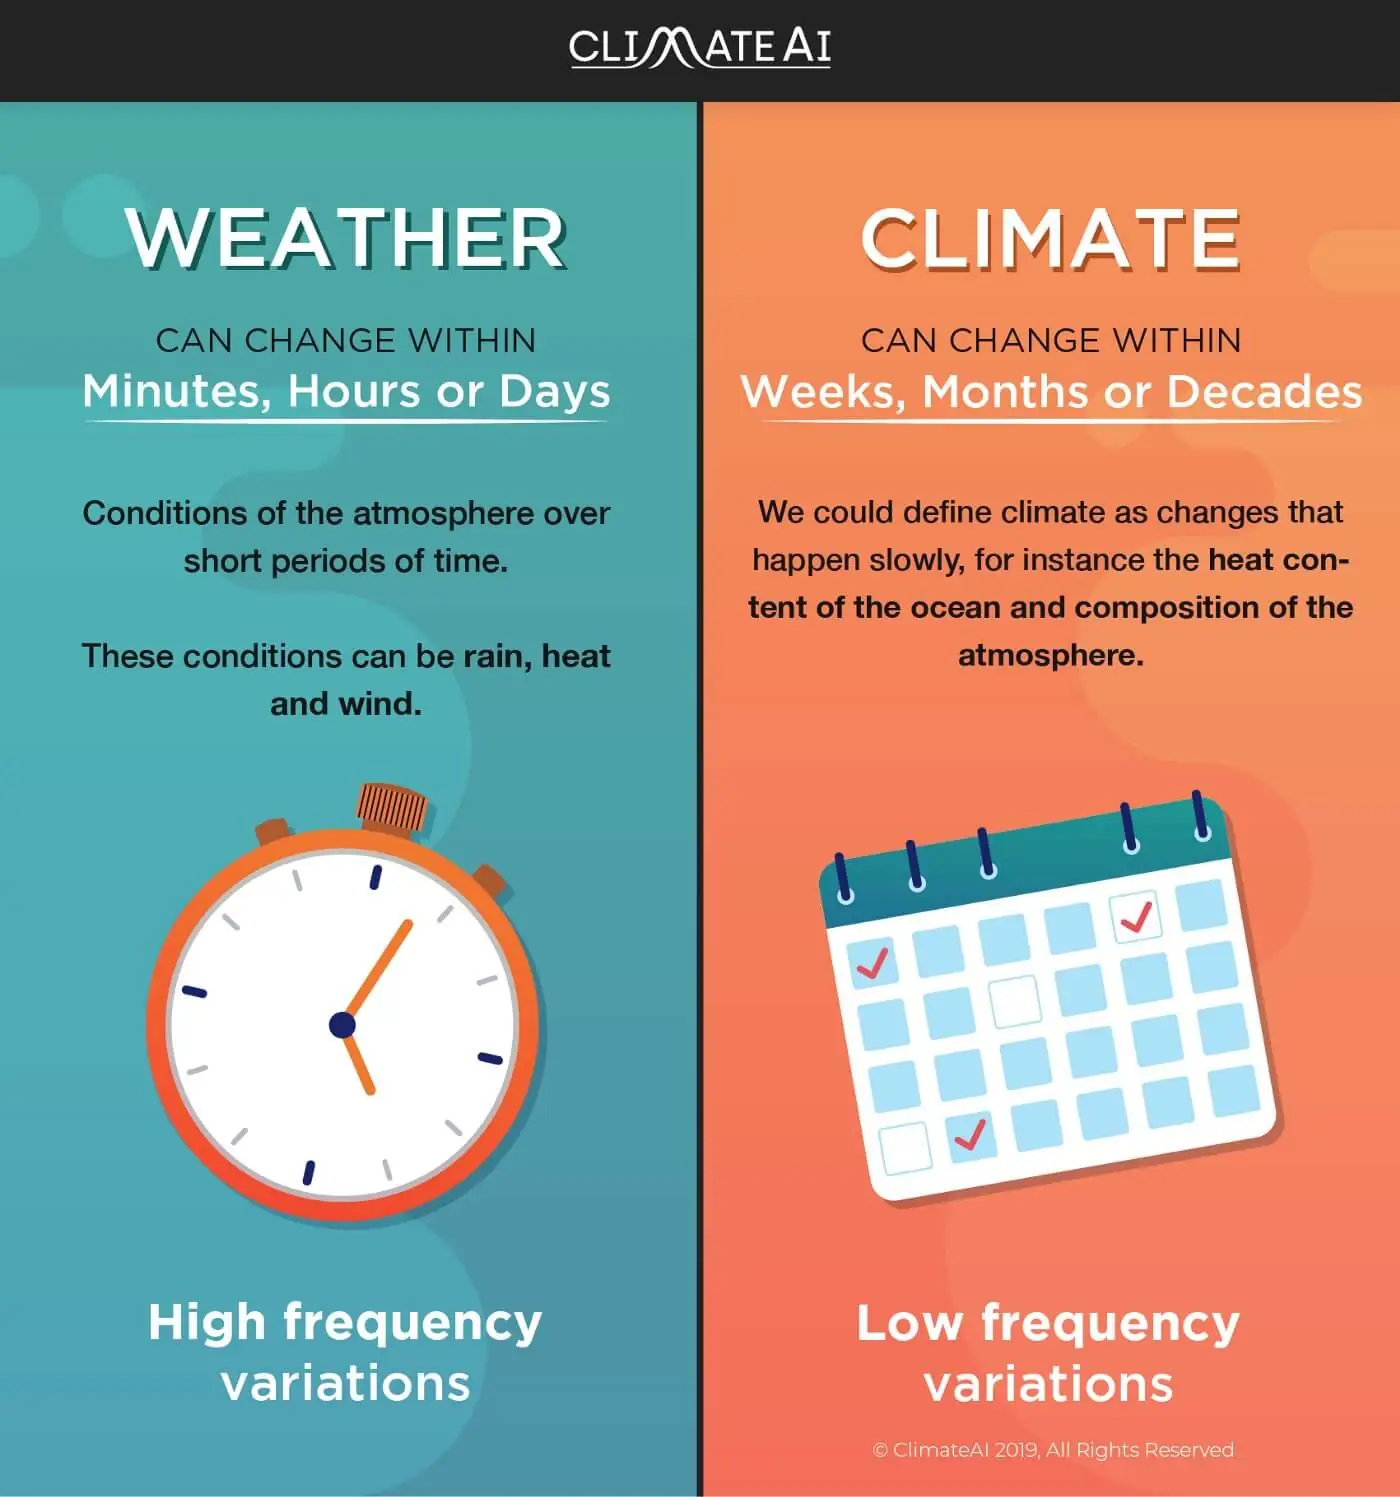 what's the difference between weather forecasts and climate forecasts?